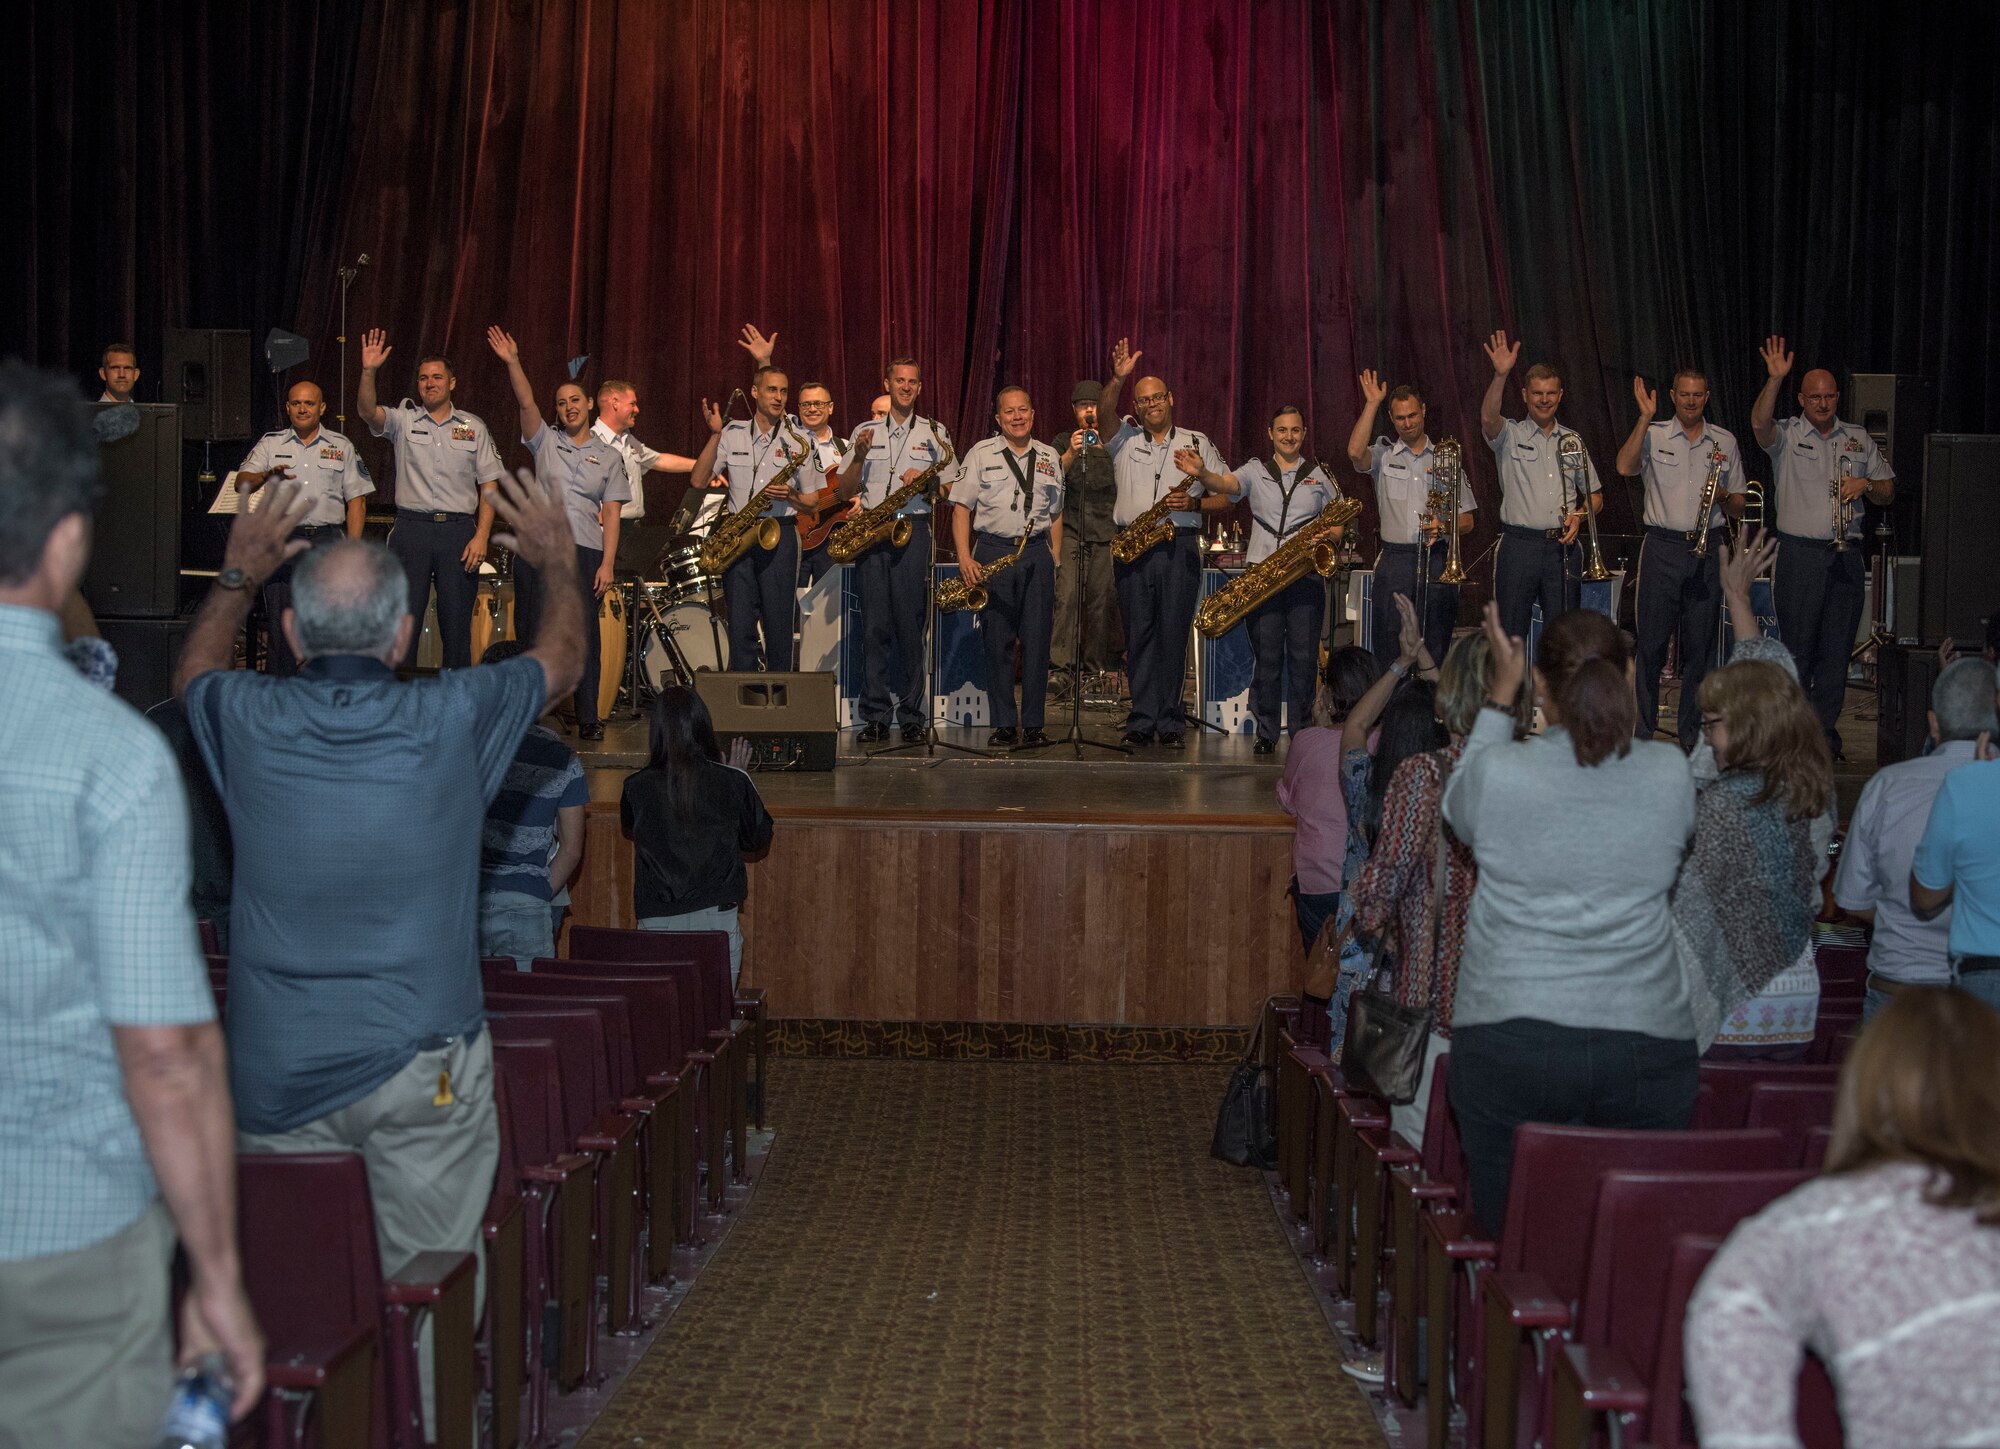 The United States Air Force Band of the West, from Joint Base San Antonio-Lackland, begin their week-long tour April 2, 2019 at Teatro Escuela Especializada en Bellas Artes Anita Otero in Humacao, Puerto Rico, as part of a series of performances and masterclasses around the island featuring multiple Band of the West ensembles. The USAF Band of the West are touring the island of Puerto Rico to tell the Air Force's story through live music and to continue building relationships with Puerto Rican communities during concerts. (Air Force photo by: Airman 1st Class Shelby Pruitt)